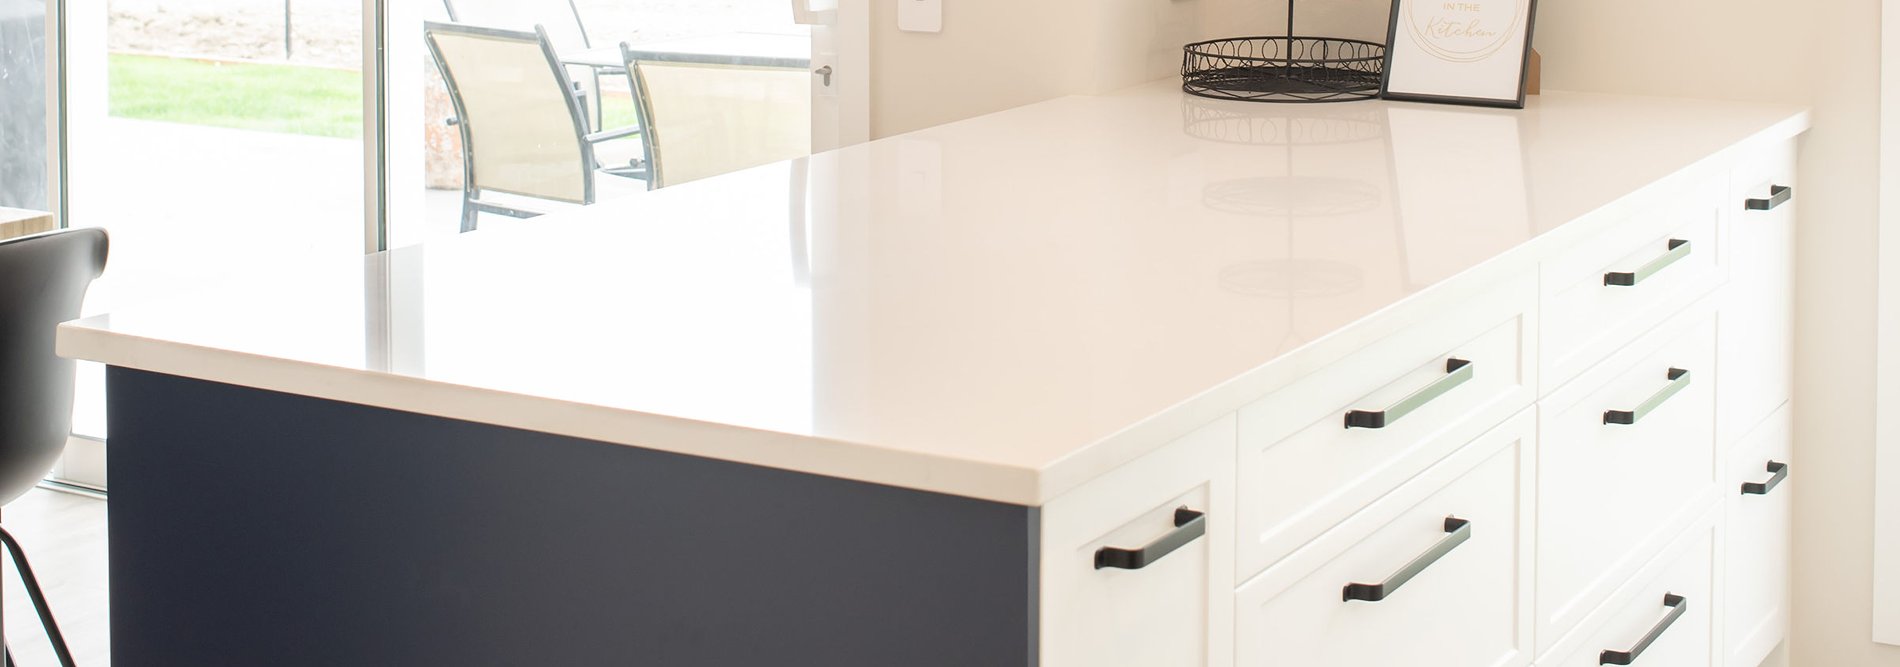 Clean and sleek white kitchen counter top